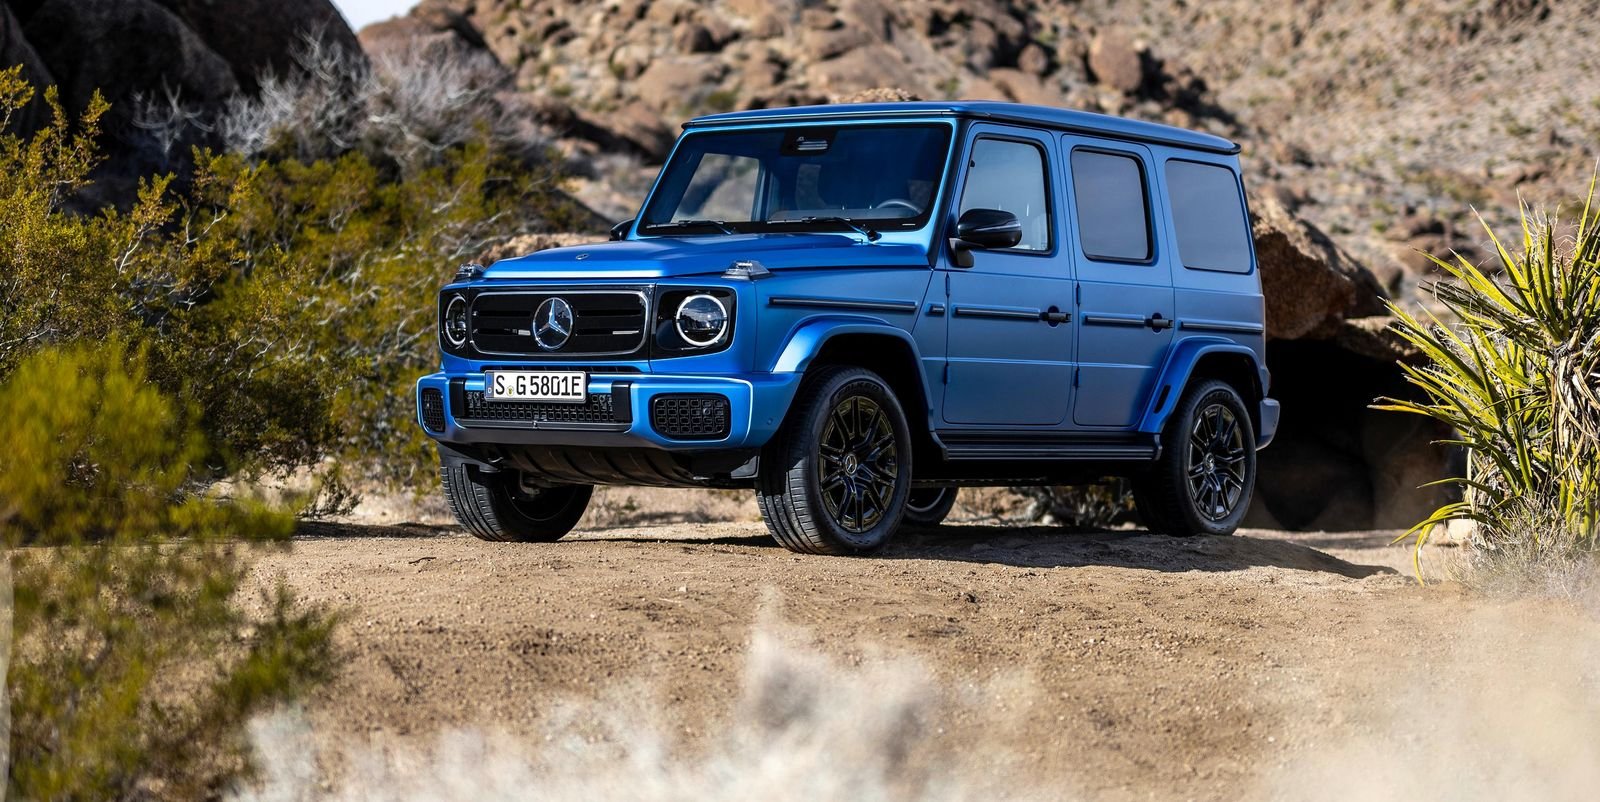 Mercedes G-Class Switches to Electric Power But Maintains Its Blocky Shape